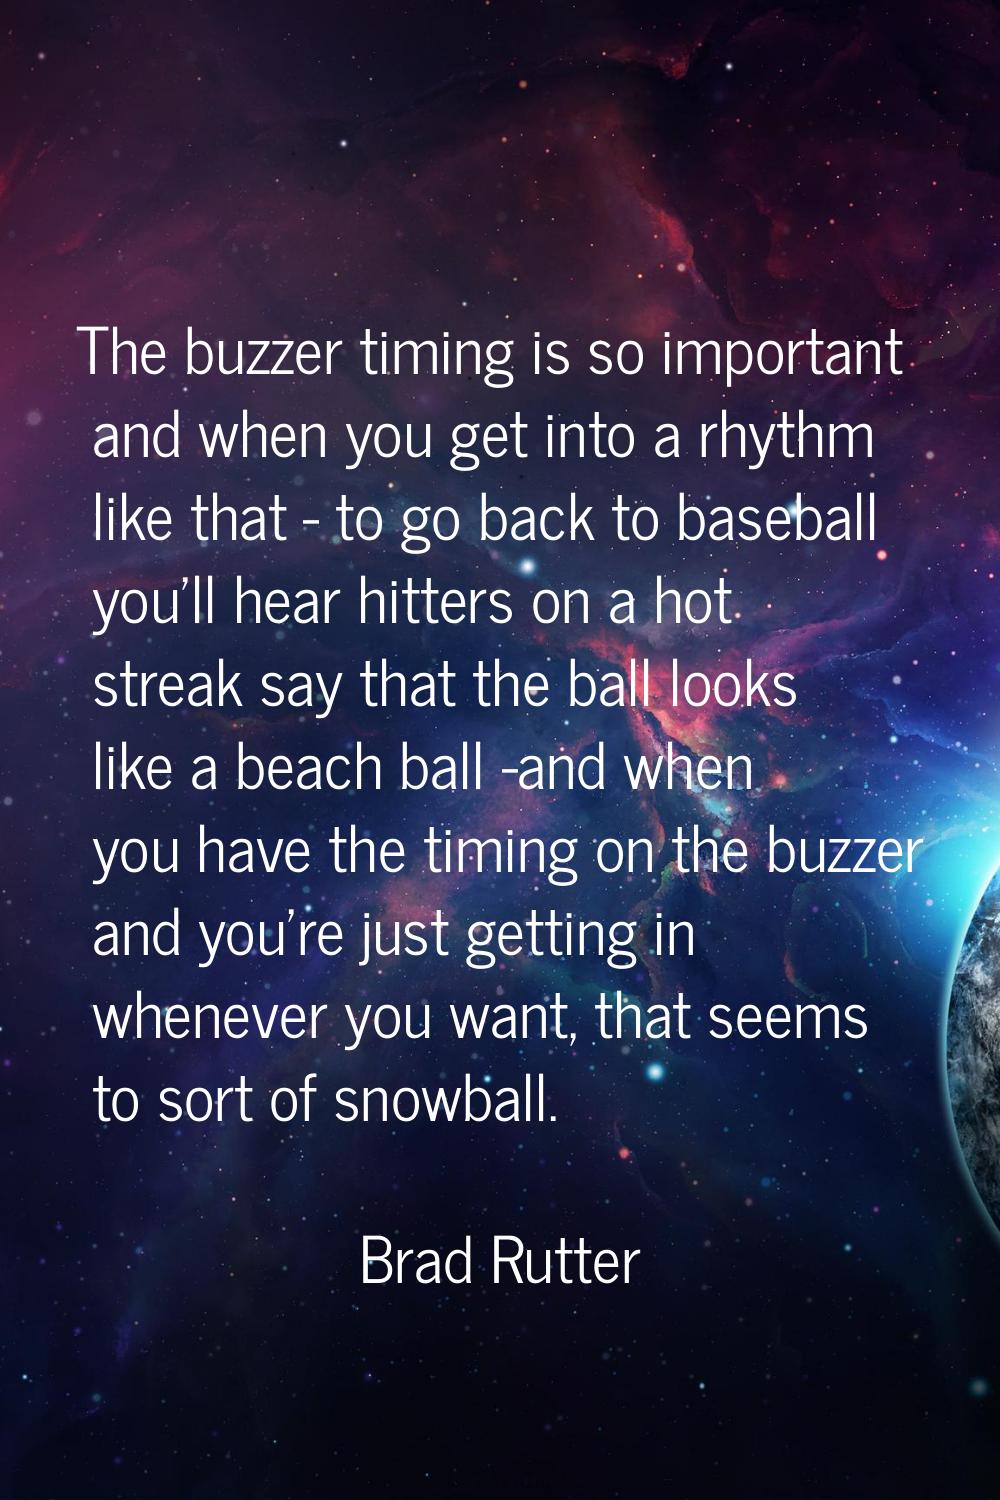 The buzzer timing is so important and when you get into a rhythm like that - to go back to baseball